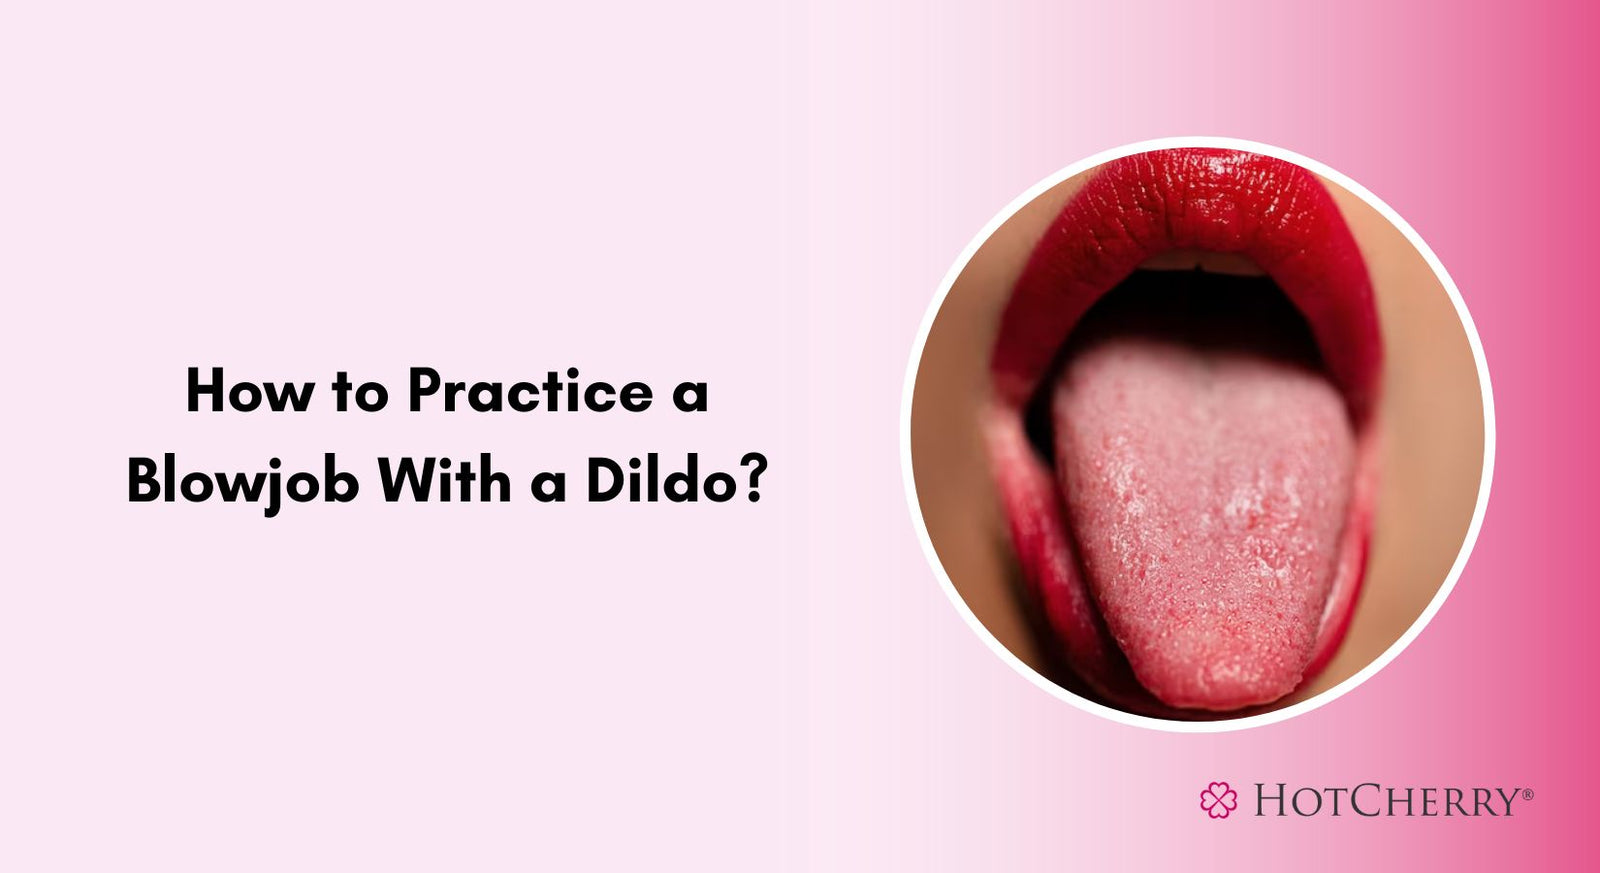 How to Practice a Blowjob With a Dildo?